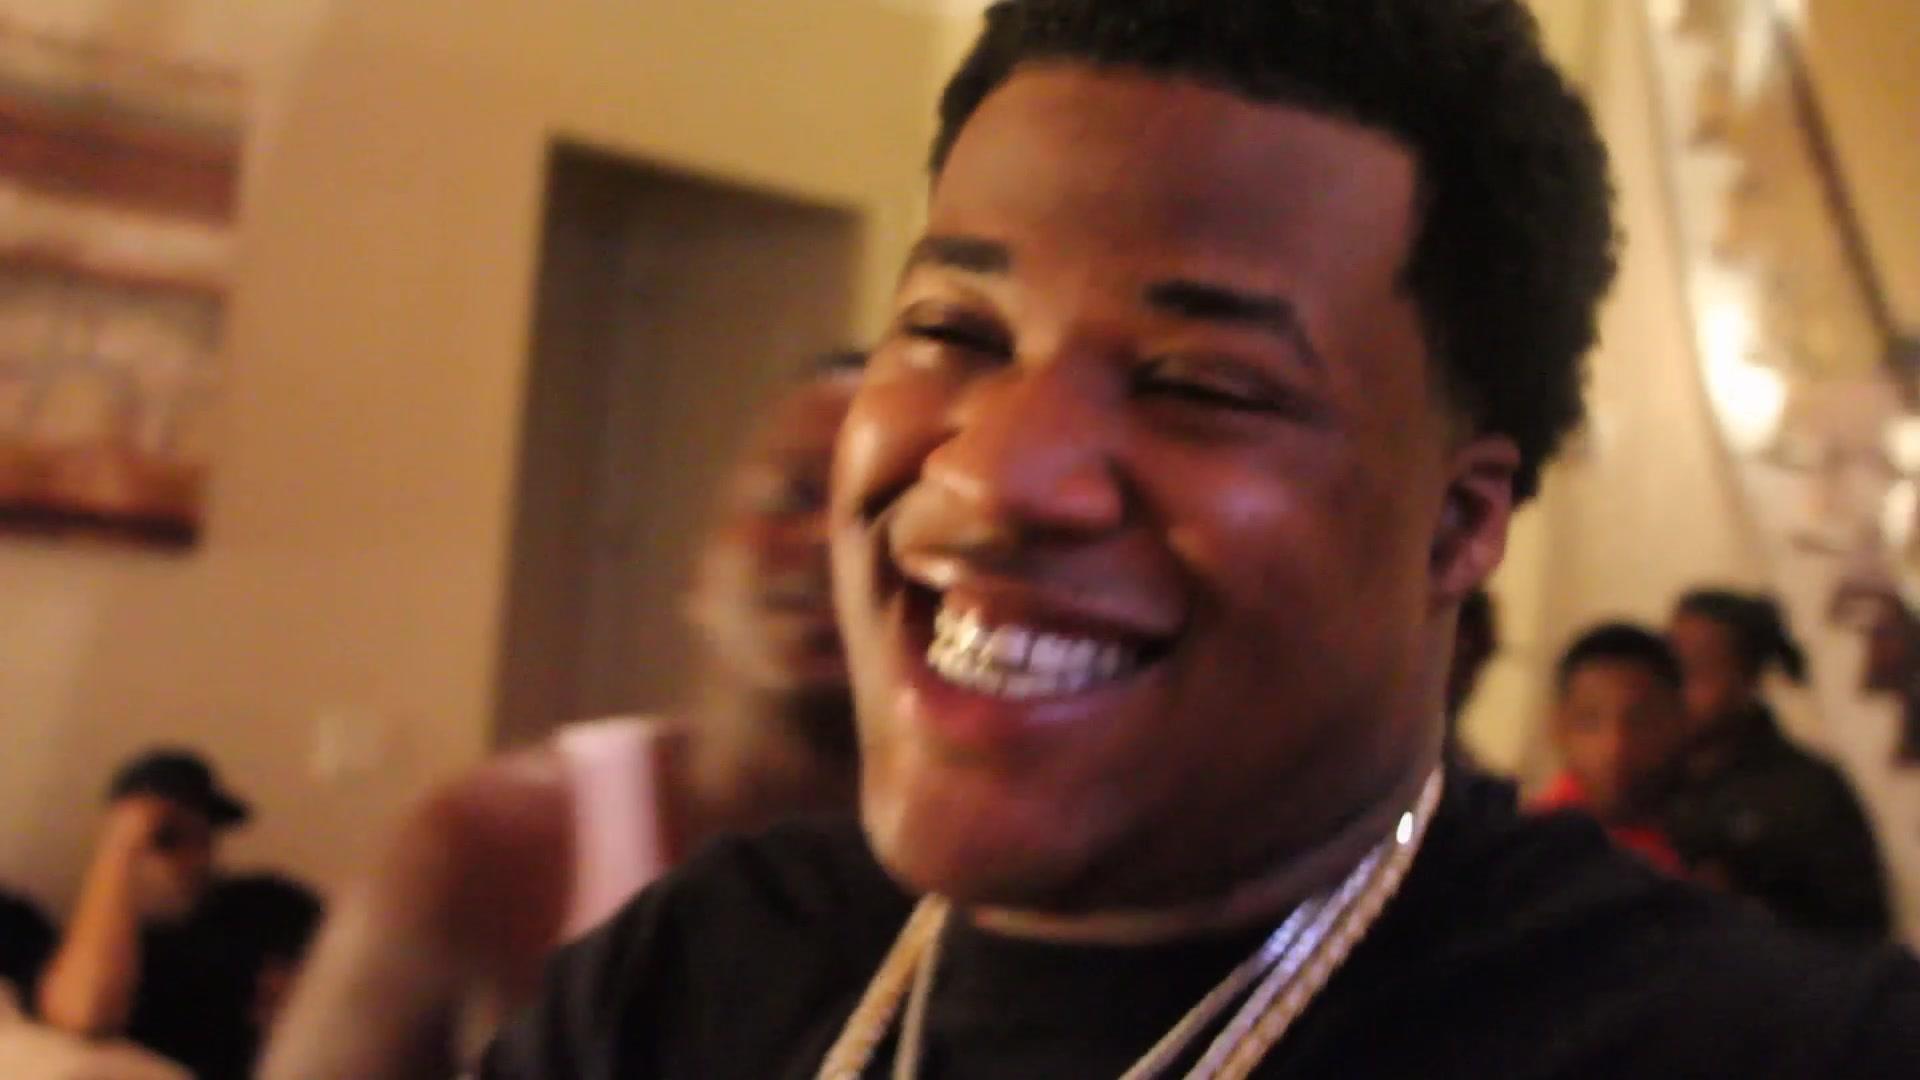 Lil Phat was "Being Set Up for Success"